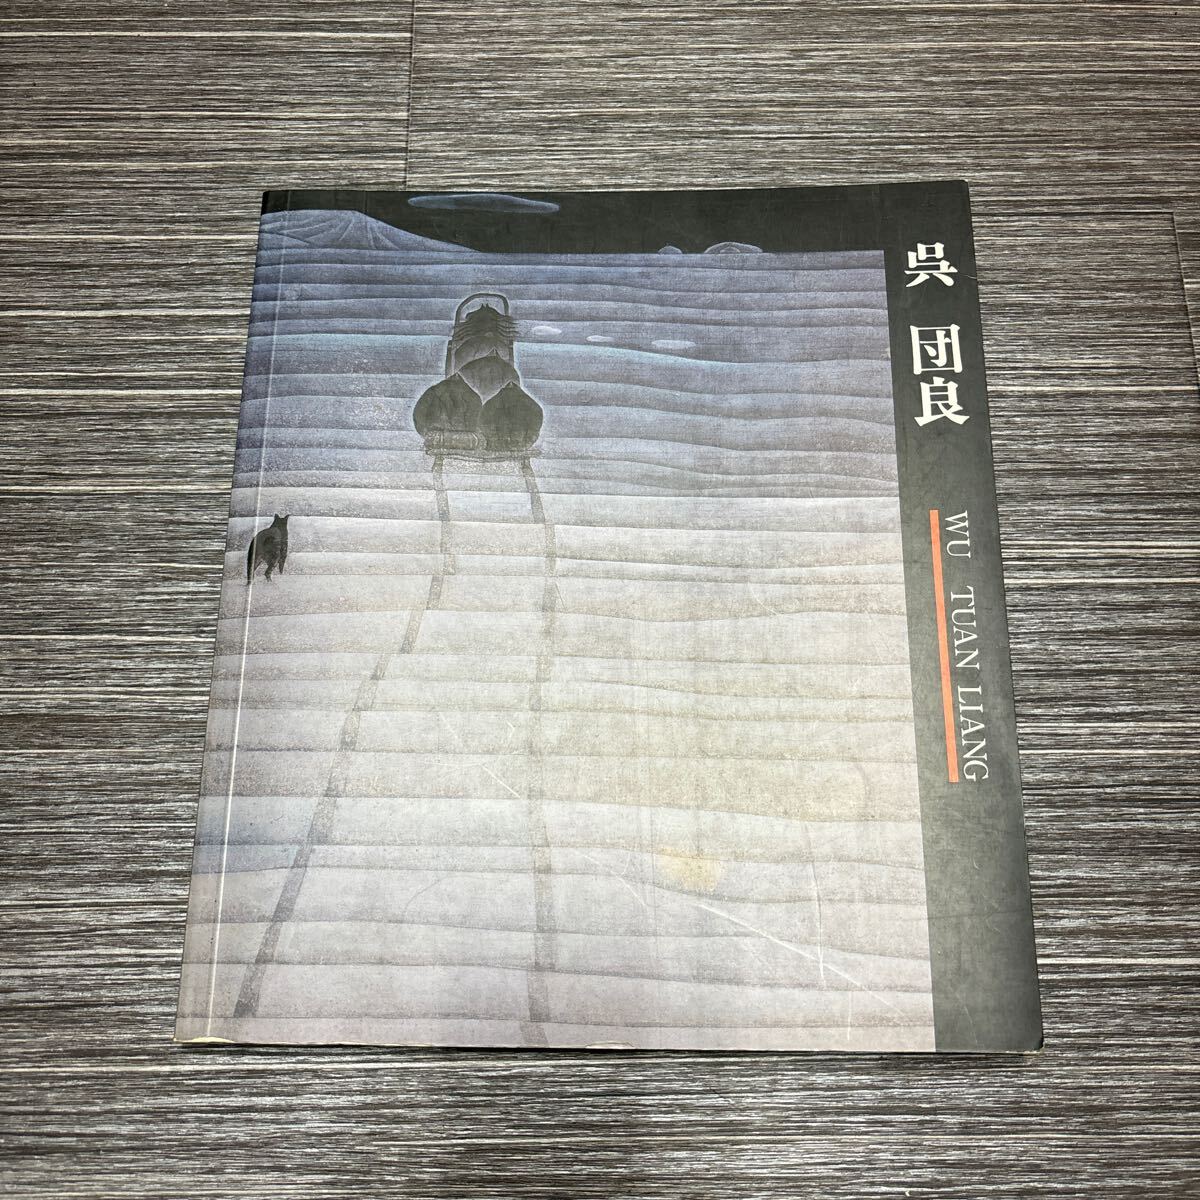 ●Catalogue●Wu Tuan Liang Exhibition WU TUAN LIANG/Yamanashi Prefectural Museum of Art/1992/The Genius of Chinese Contemporary Painting - The Blue Wind of Mongolia/Wu Tuan Liang/Art Book/Painting/Art★649-3, Painting, Art Book, Collection, Art Book